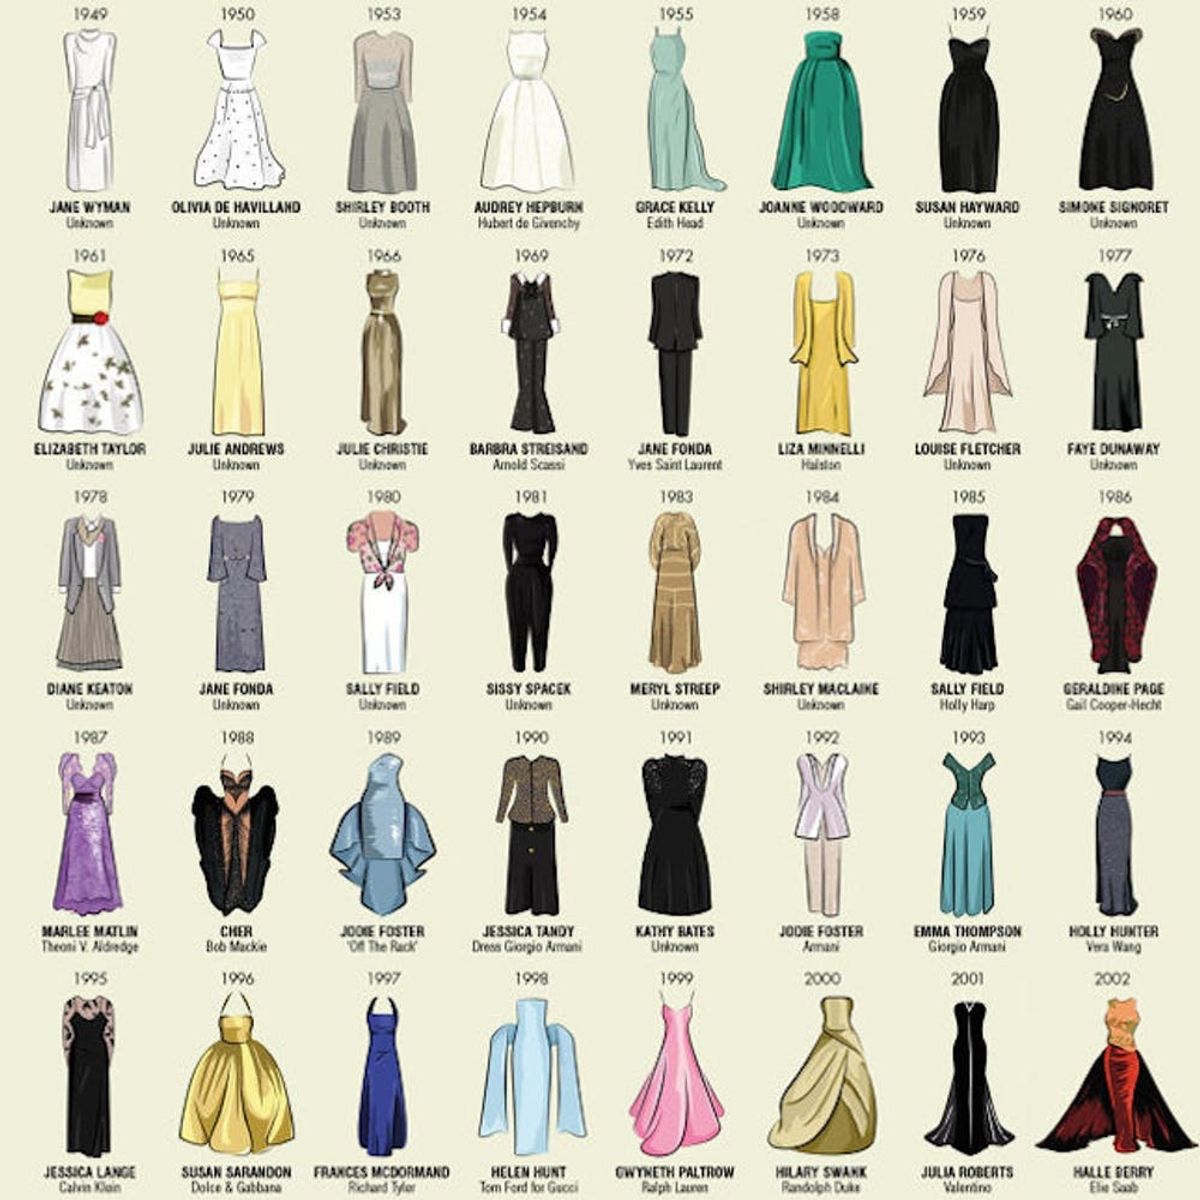 Kick Off Oscar Season With All the Best Actress Dresses - Brit + Co